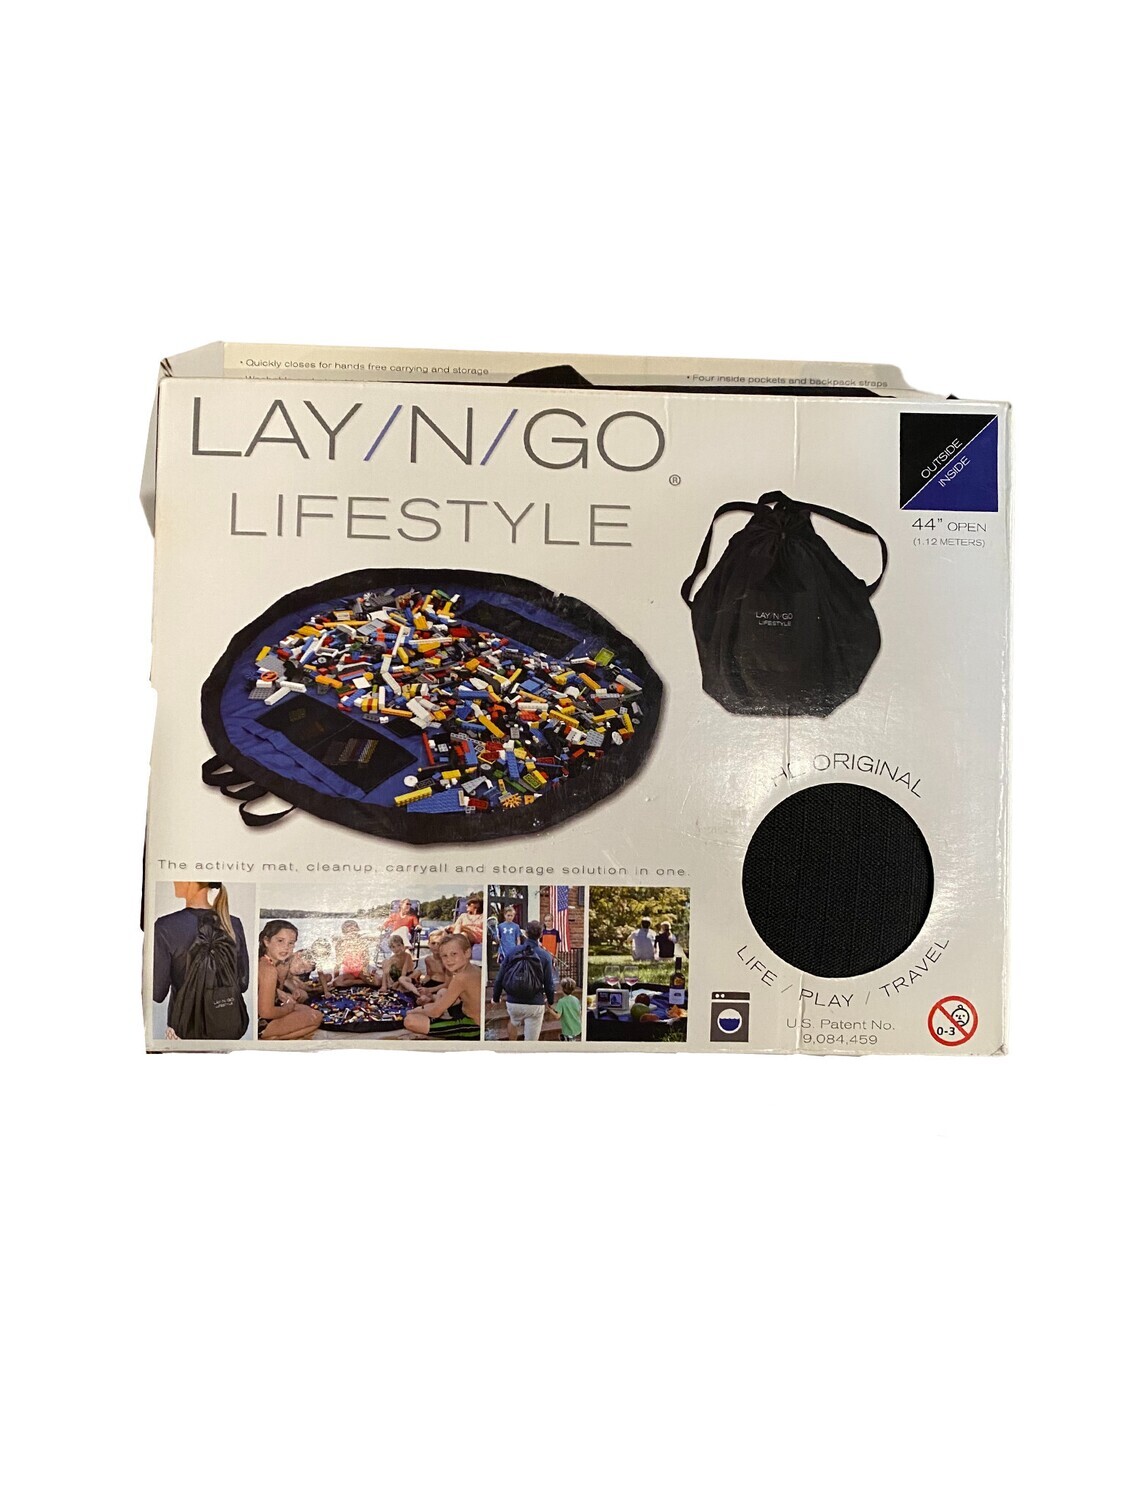 FR Lay and Go 44" Lifestyle